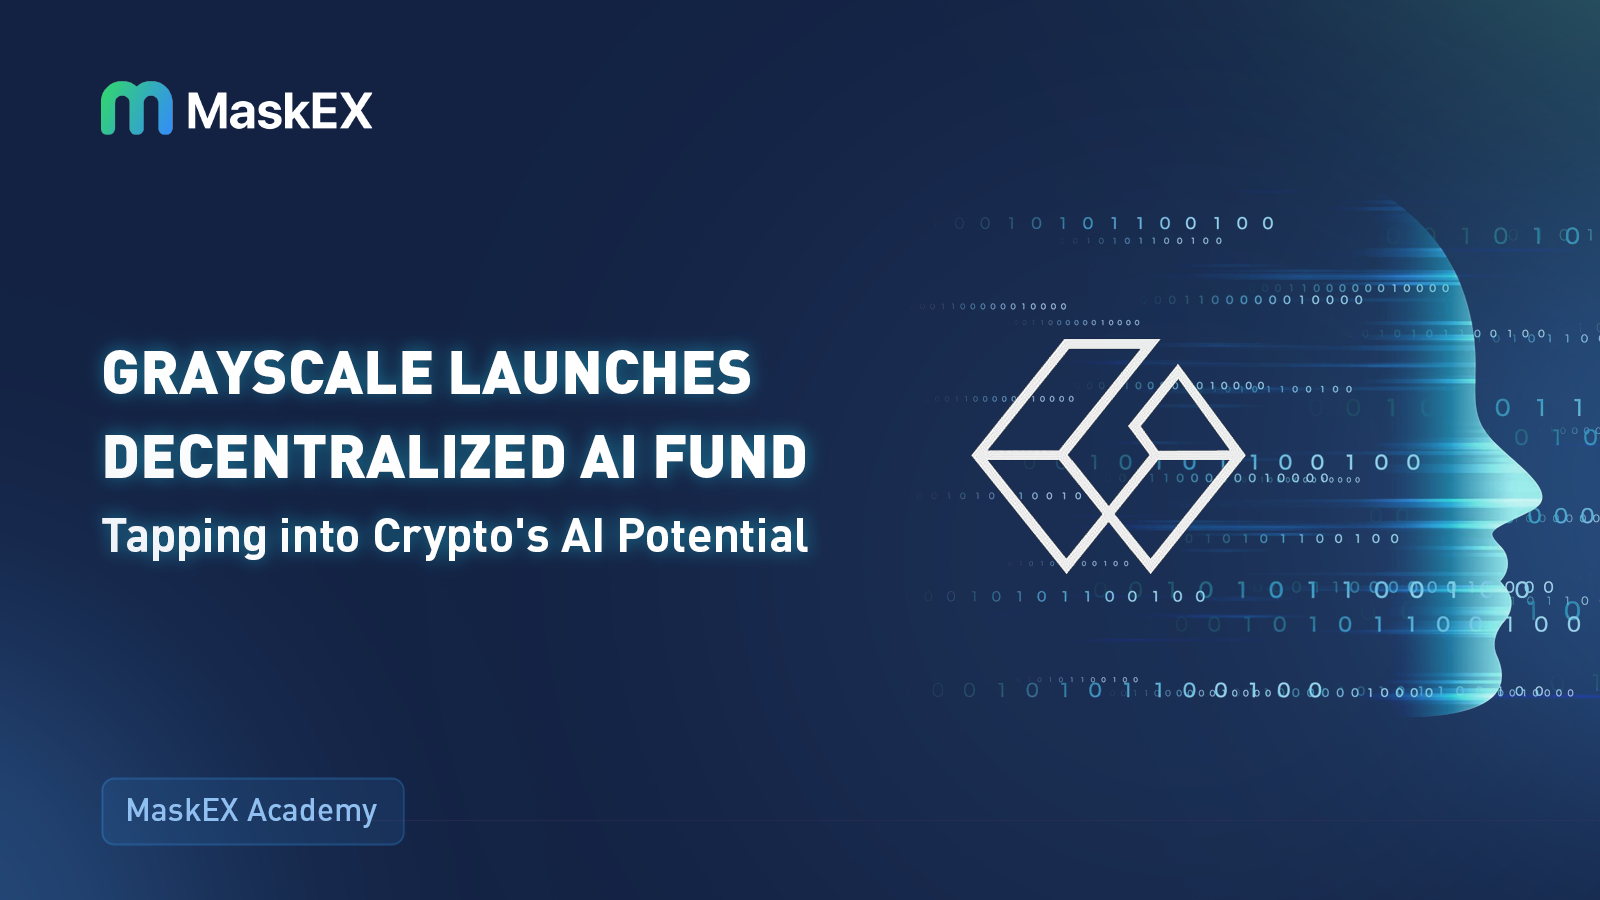 Grayscale Launches Decentralized AI Fund: Tapping into Crypto's AI Potential